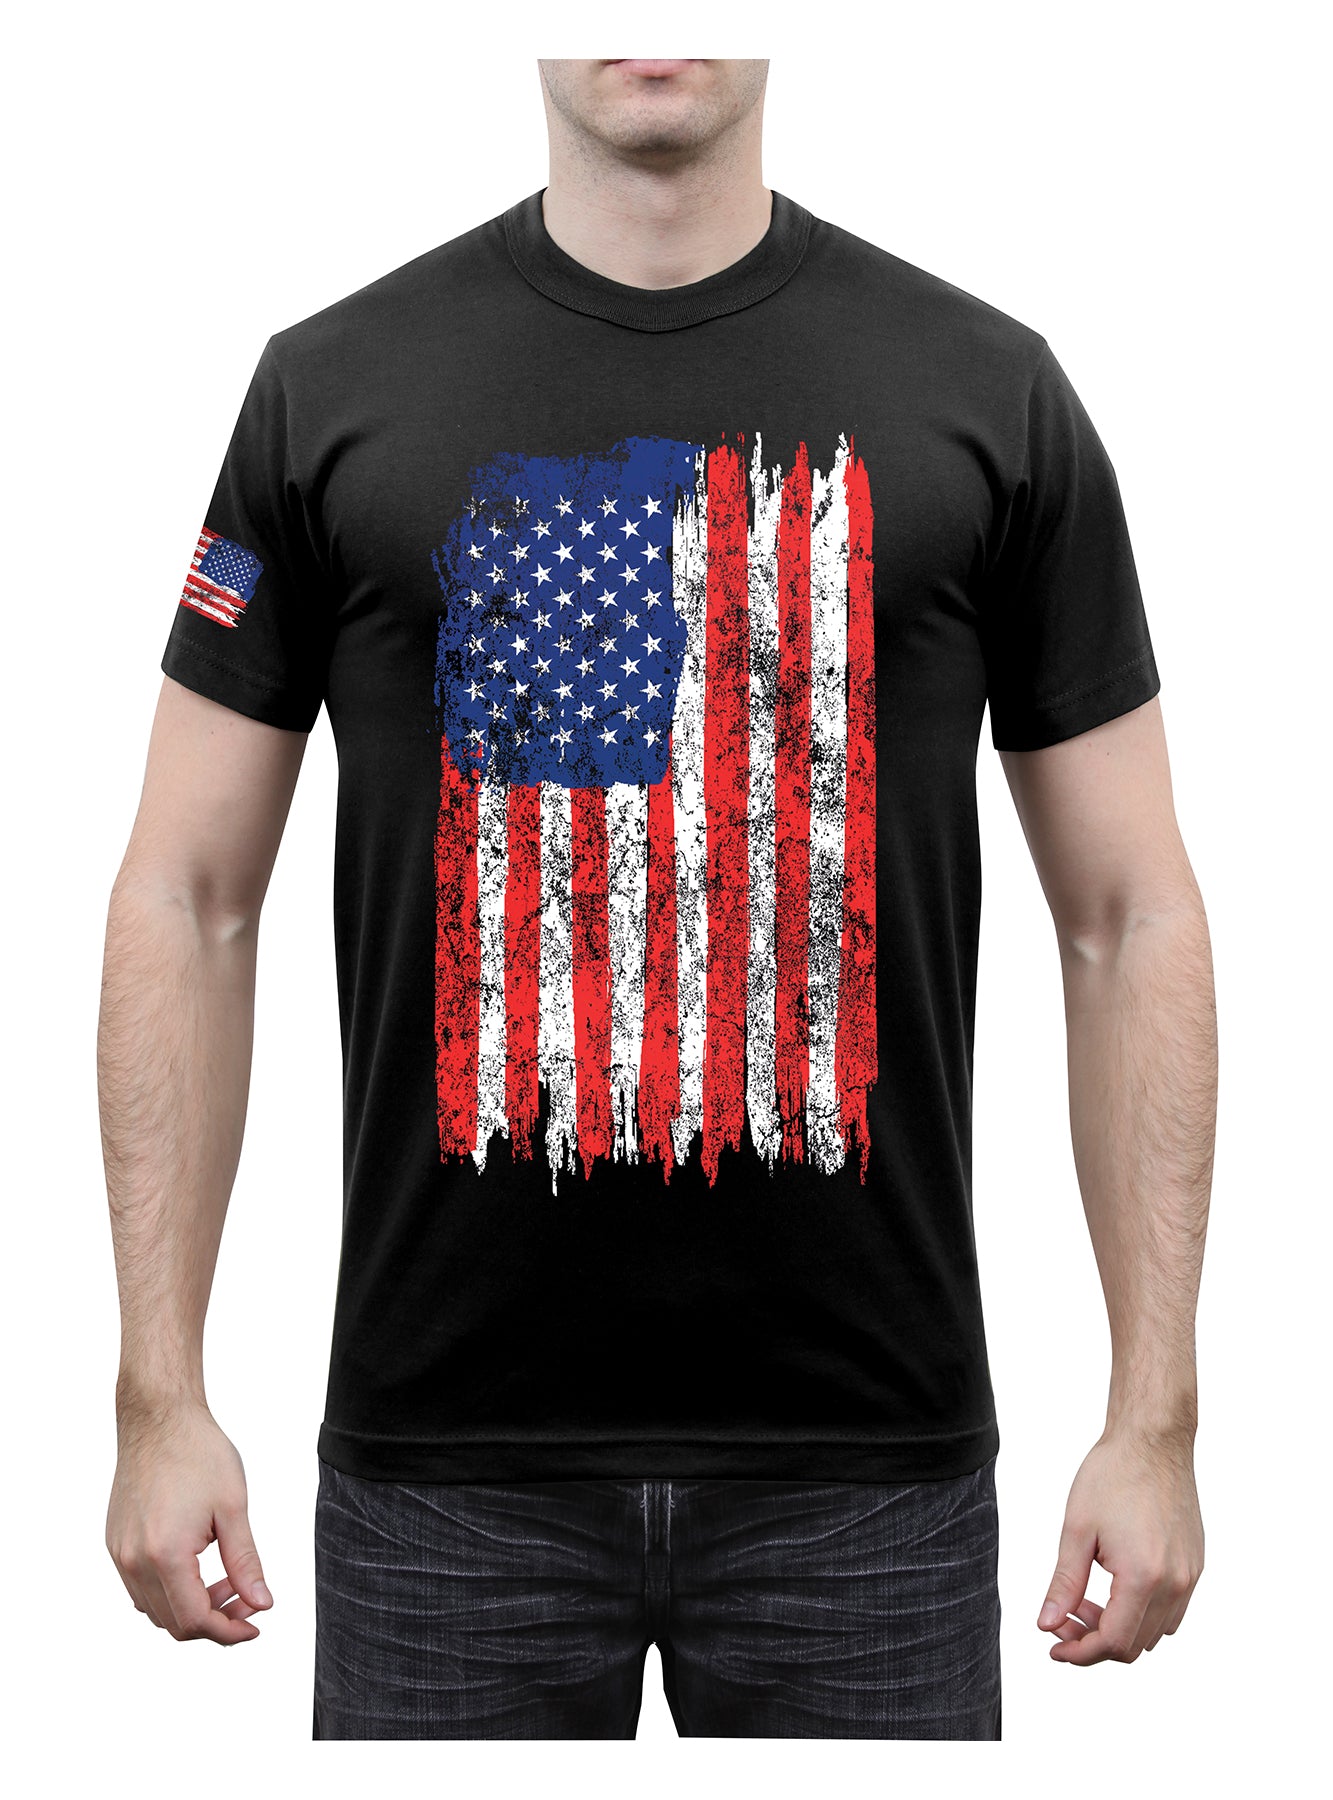 Rothco Men's Athletic Fit Distressed US Flag T-Shirt